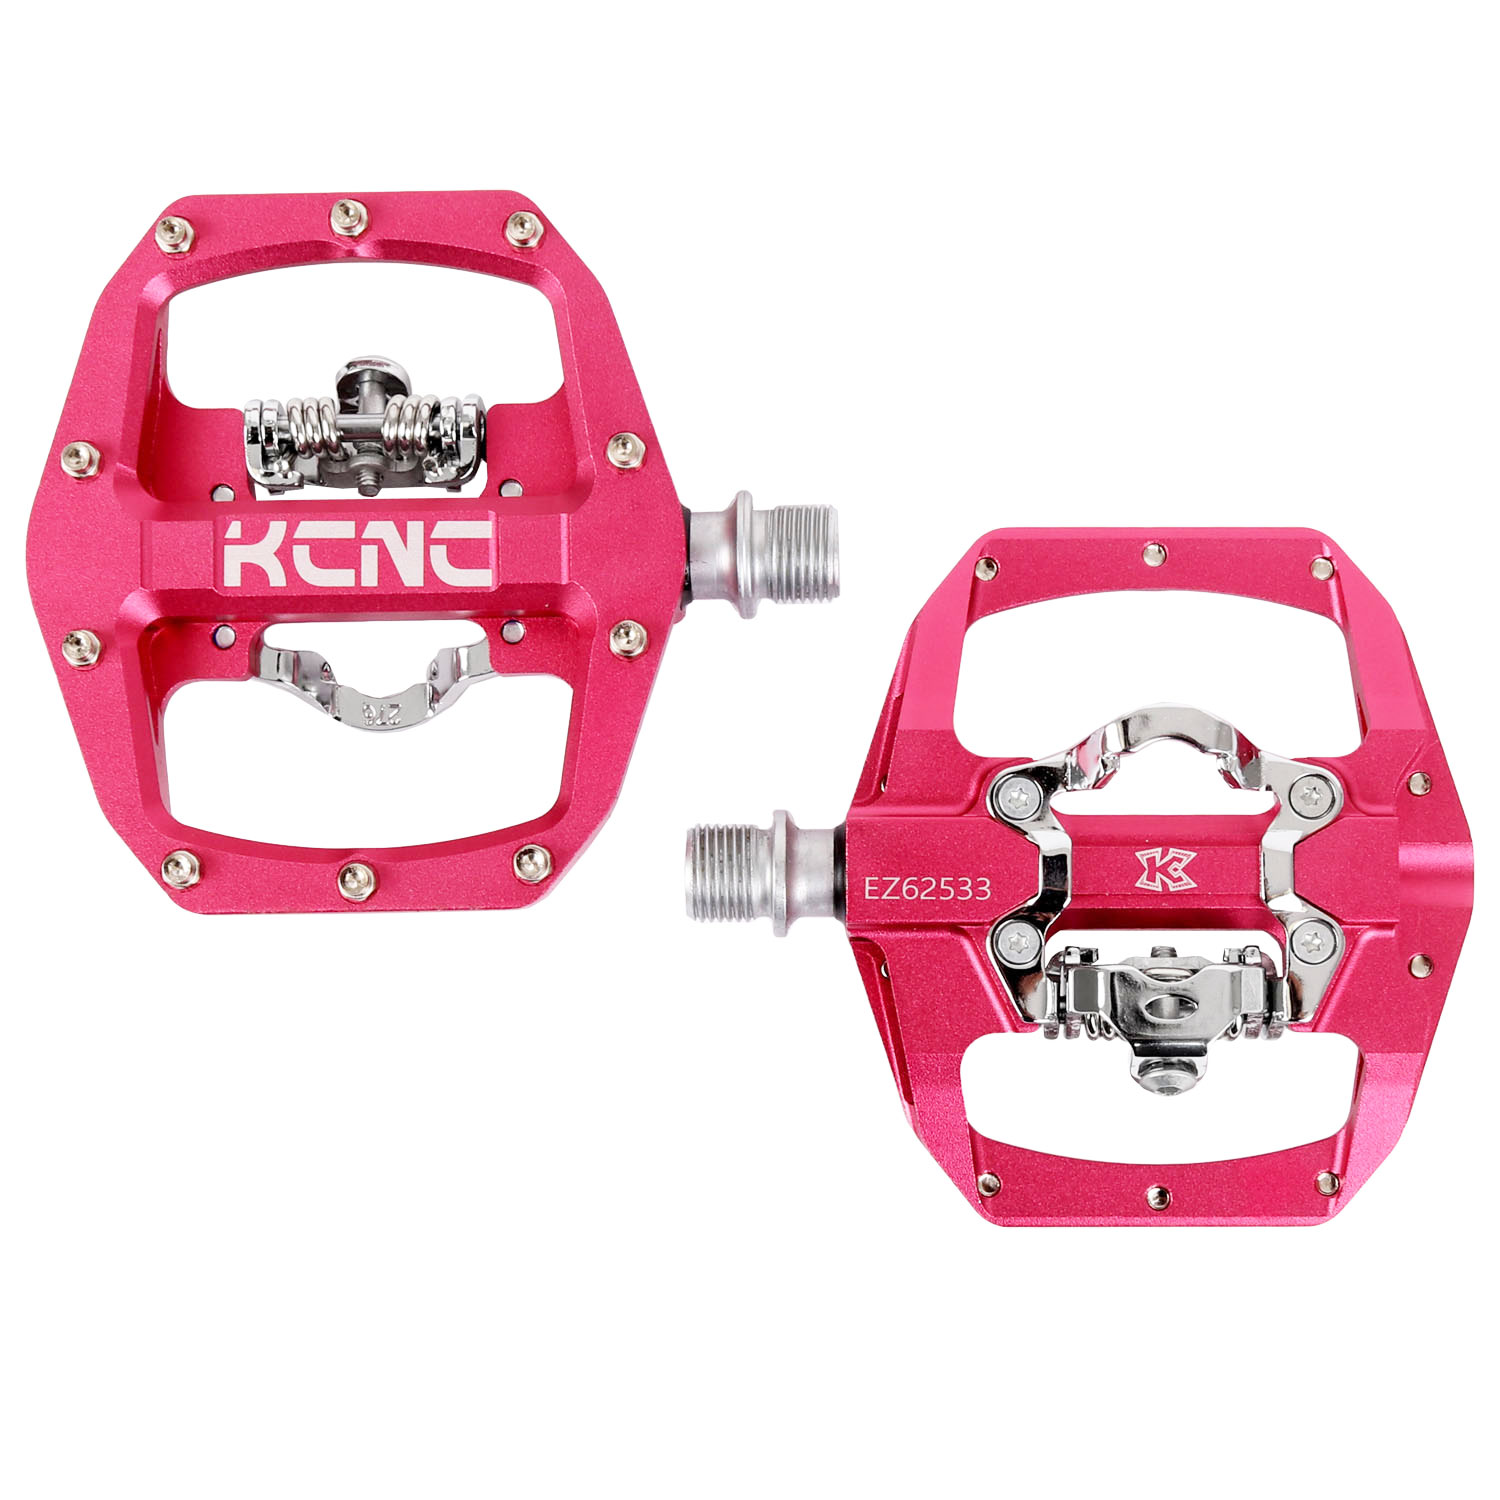 Image of KCNC FR TRAP Clipless Pedal with Steel Axle - pink